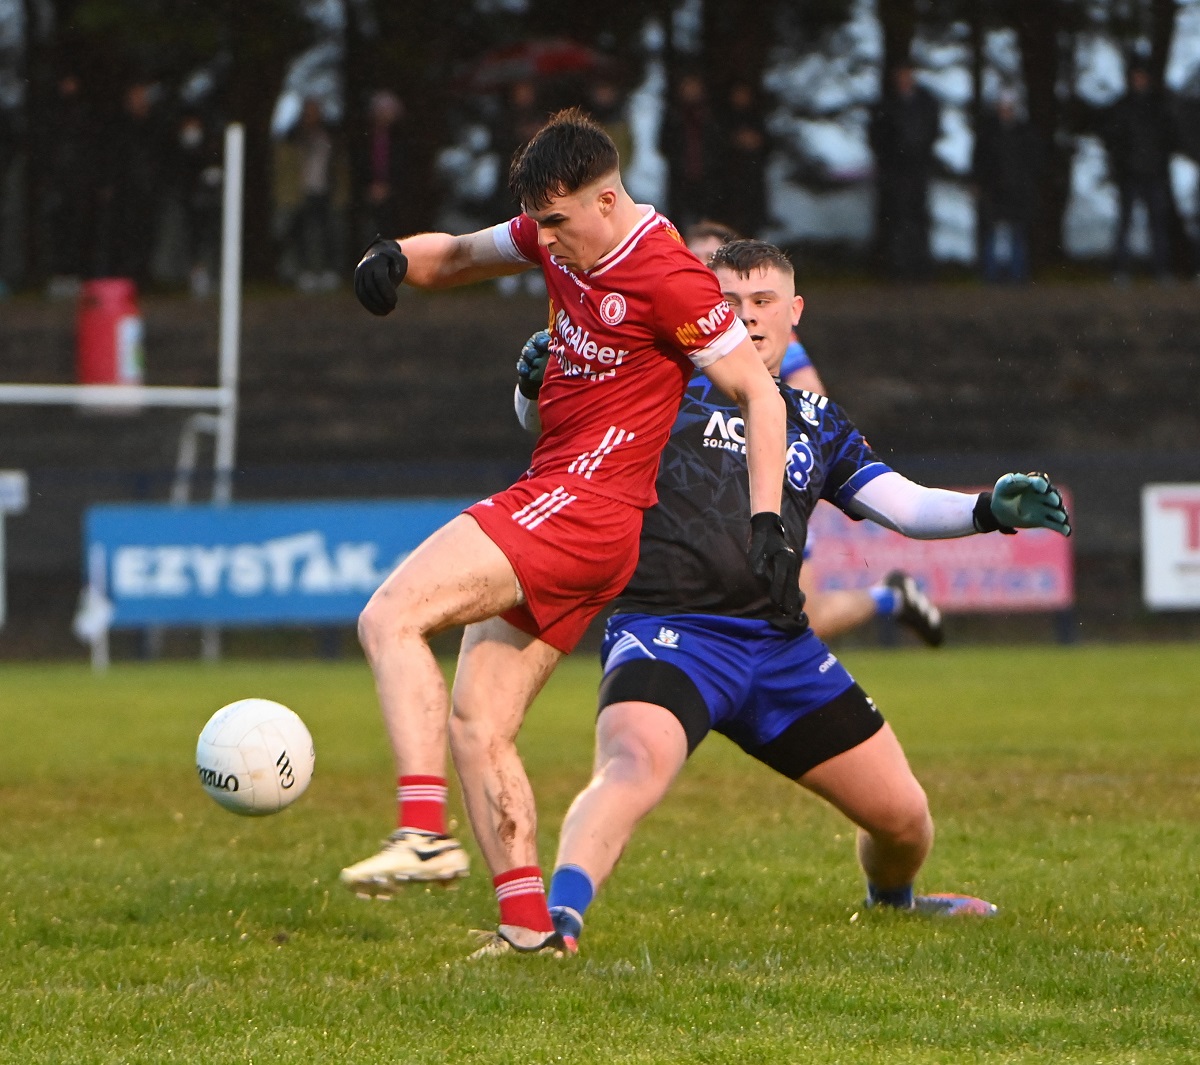 Brolly upbeat about Ulster U20 Derry decider